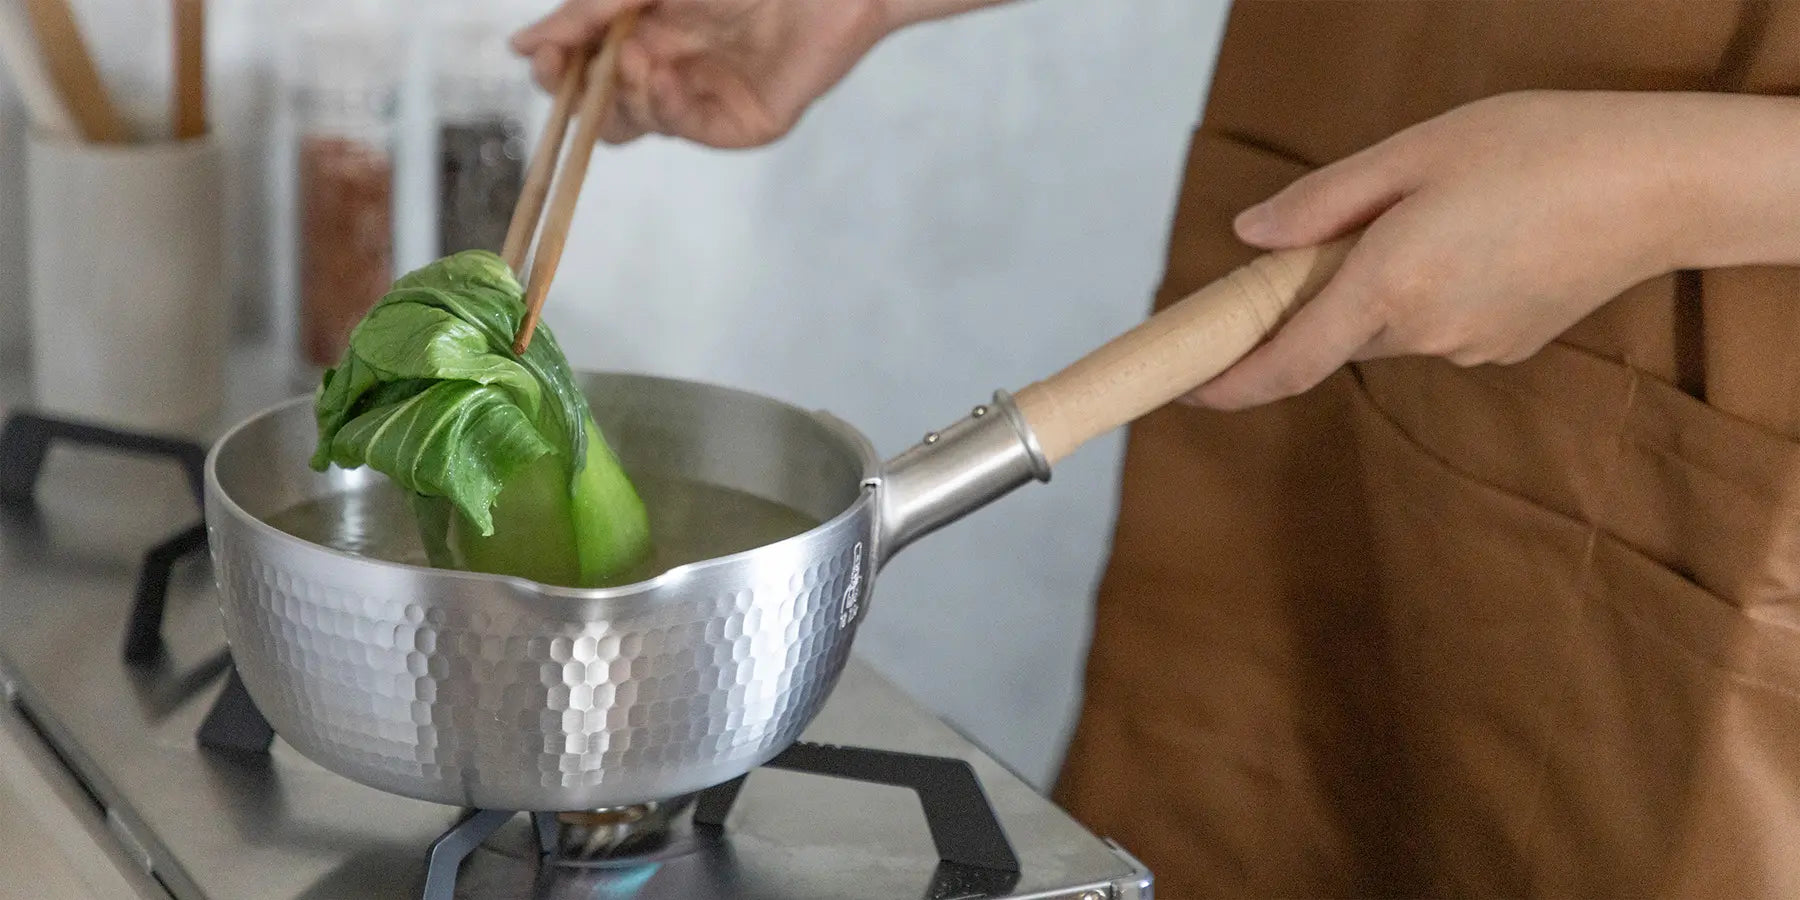 Discover our great selection of Yukihira Saucepans at Globalkitchen Japan.